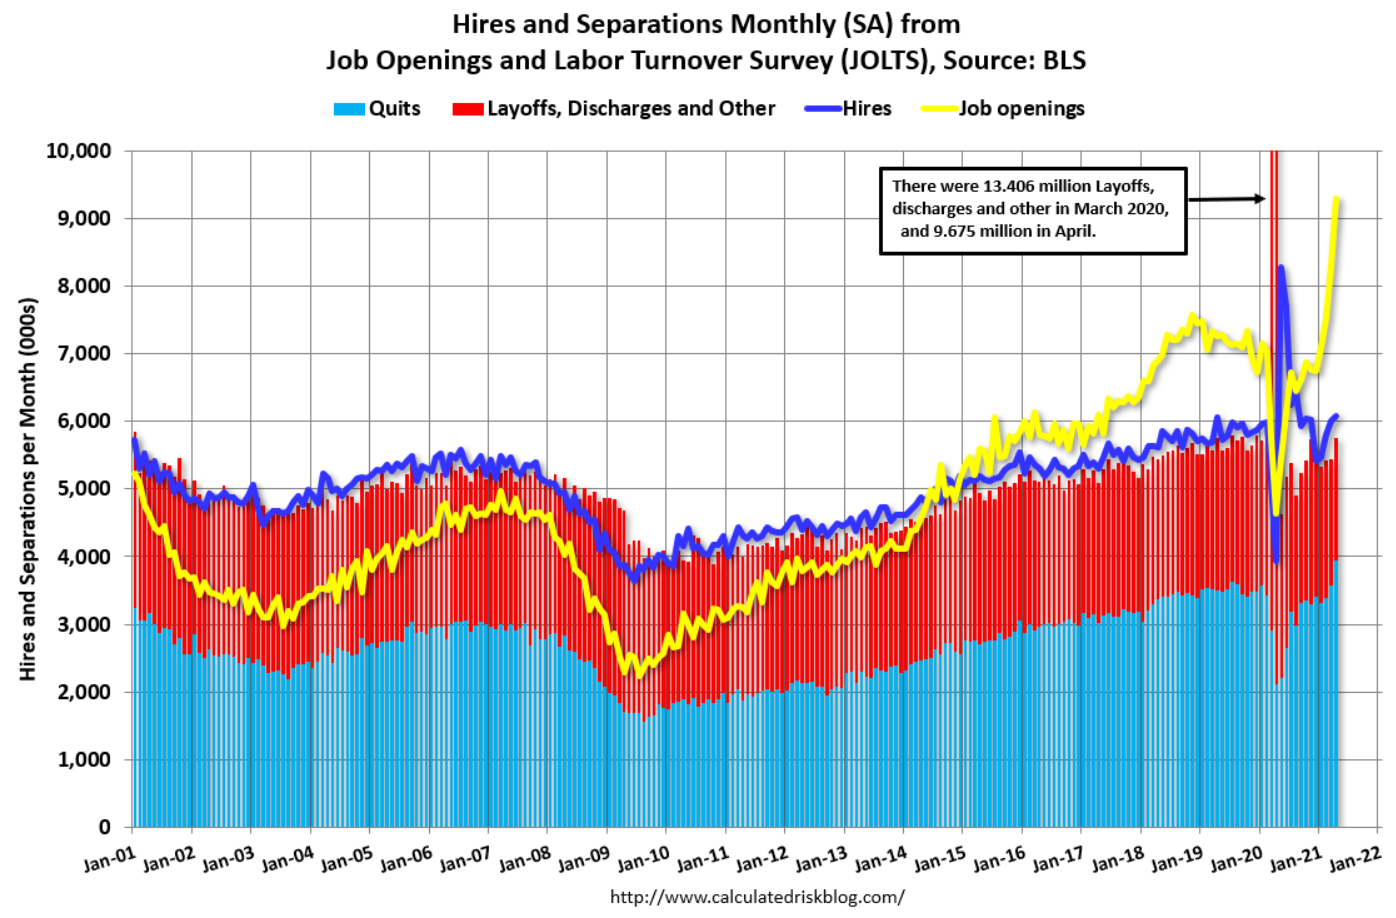 Expiring unemployment benefits, mtg purchase apps, trade, cpi